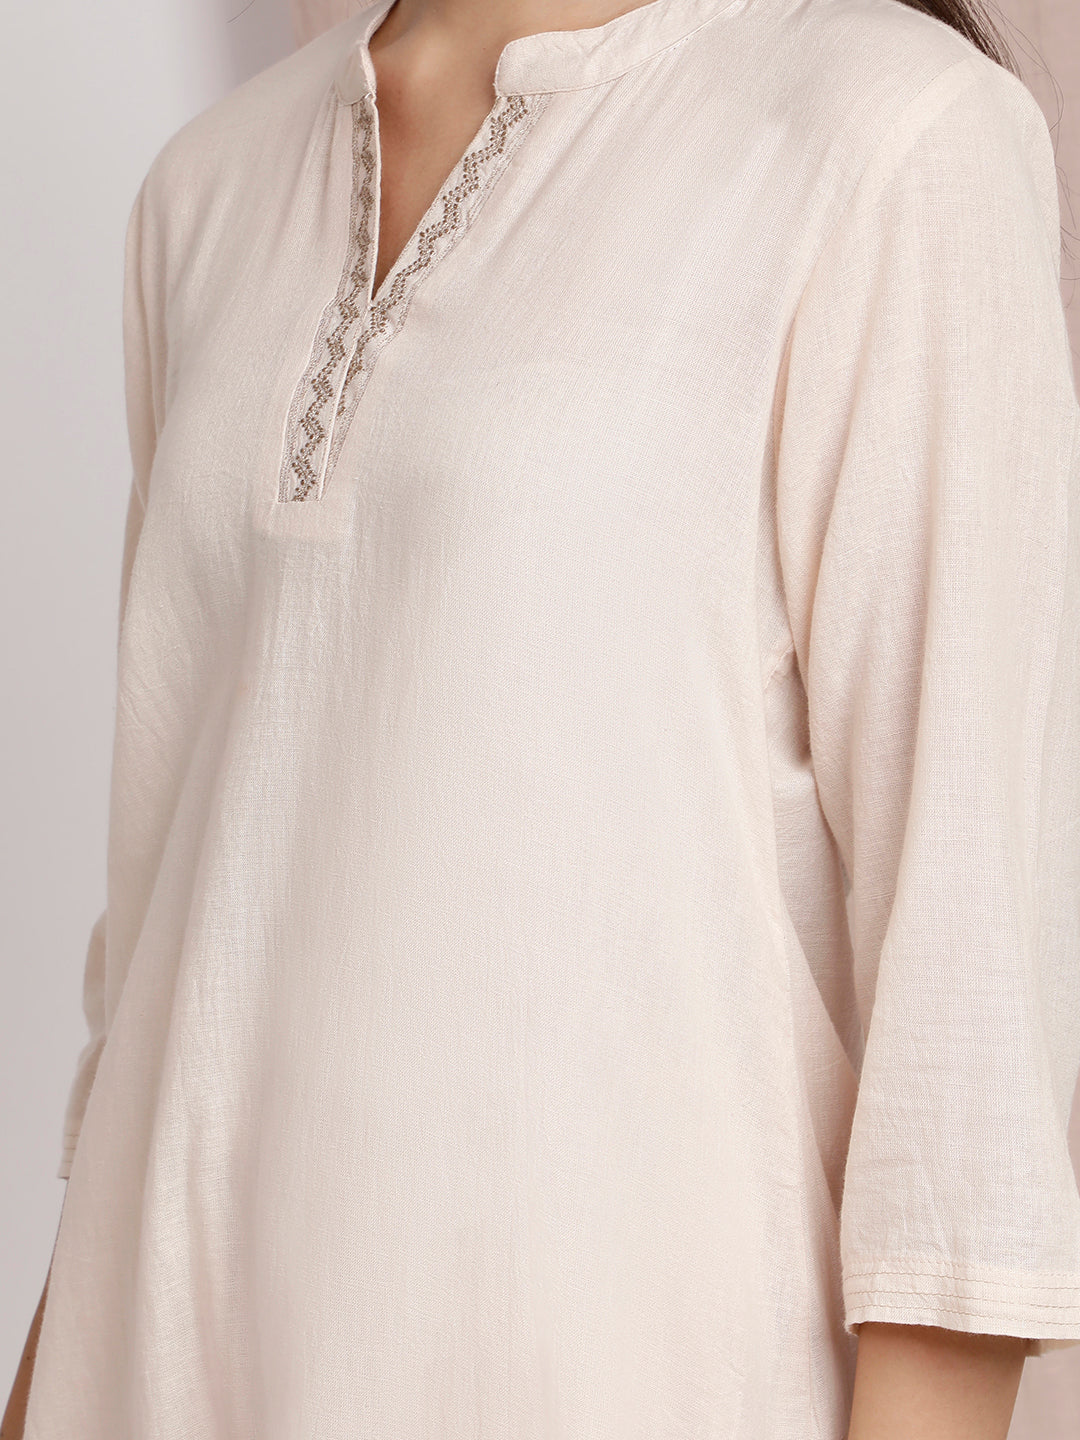 BEIGE EMBROIDERED COTTON KURTA WITH PANTS